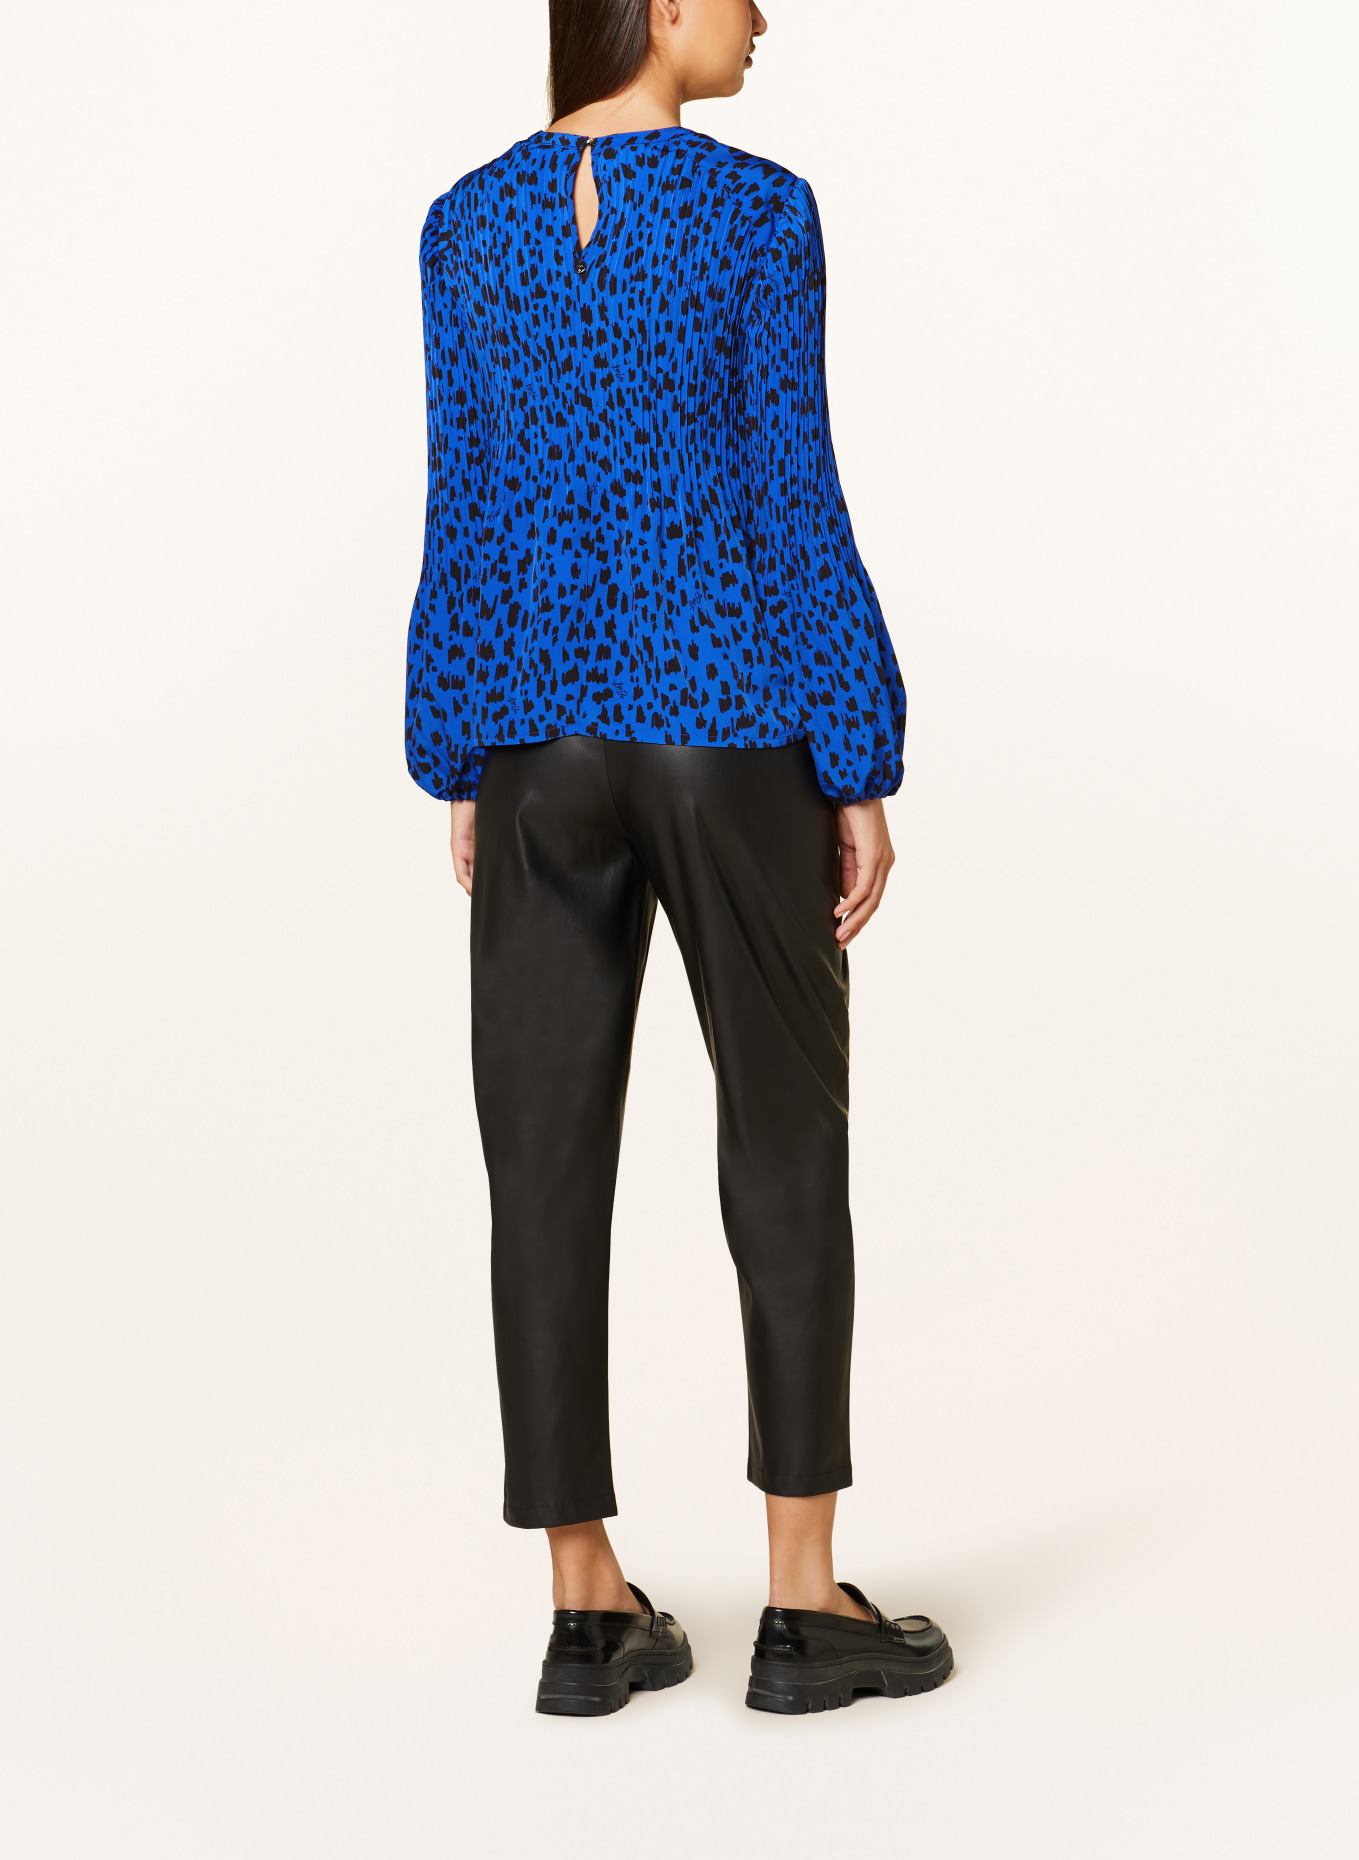 LIU JO Shirt blouse with cut-out and pleats, Color: BLUE/ BLACK (Image 3)